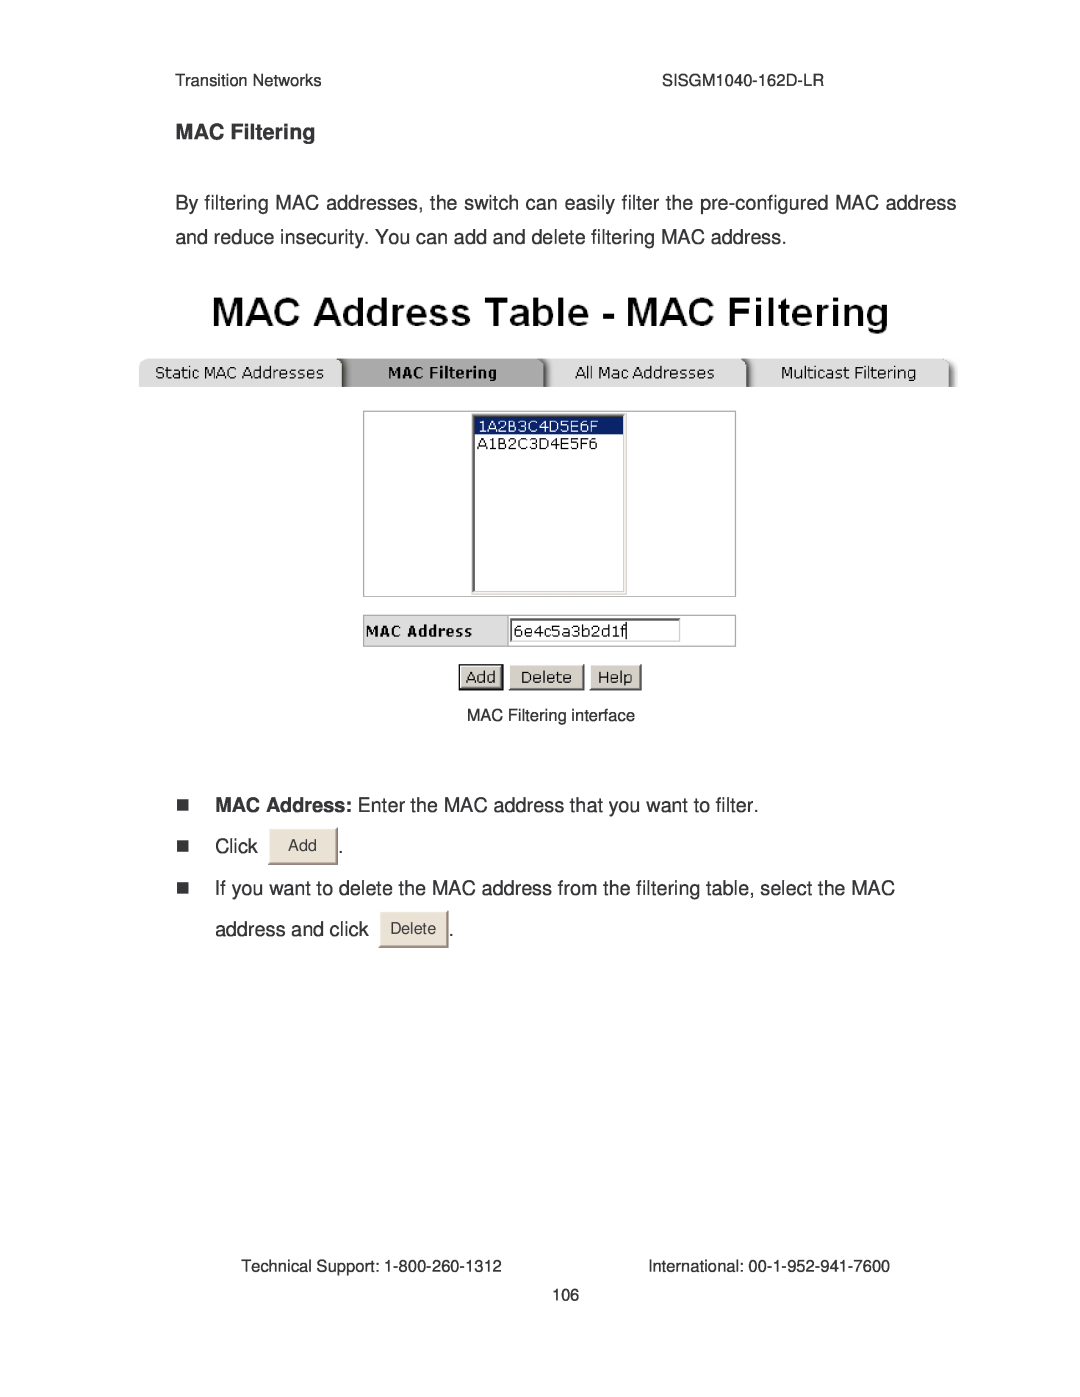 Transition Networks SISGM1040-162D manual MAC Filtering 